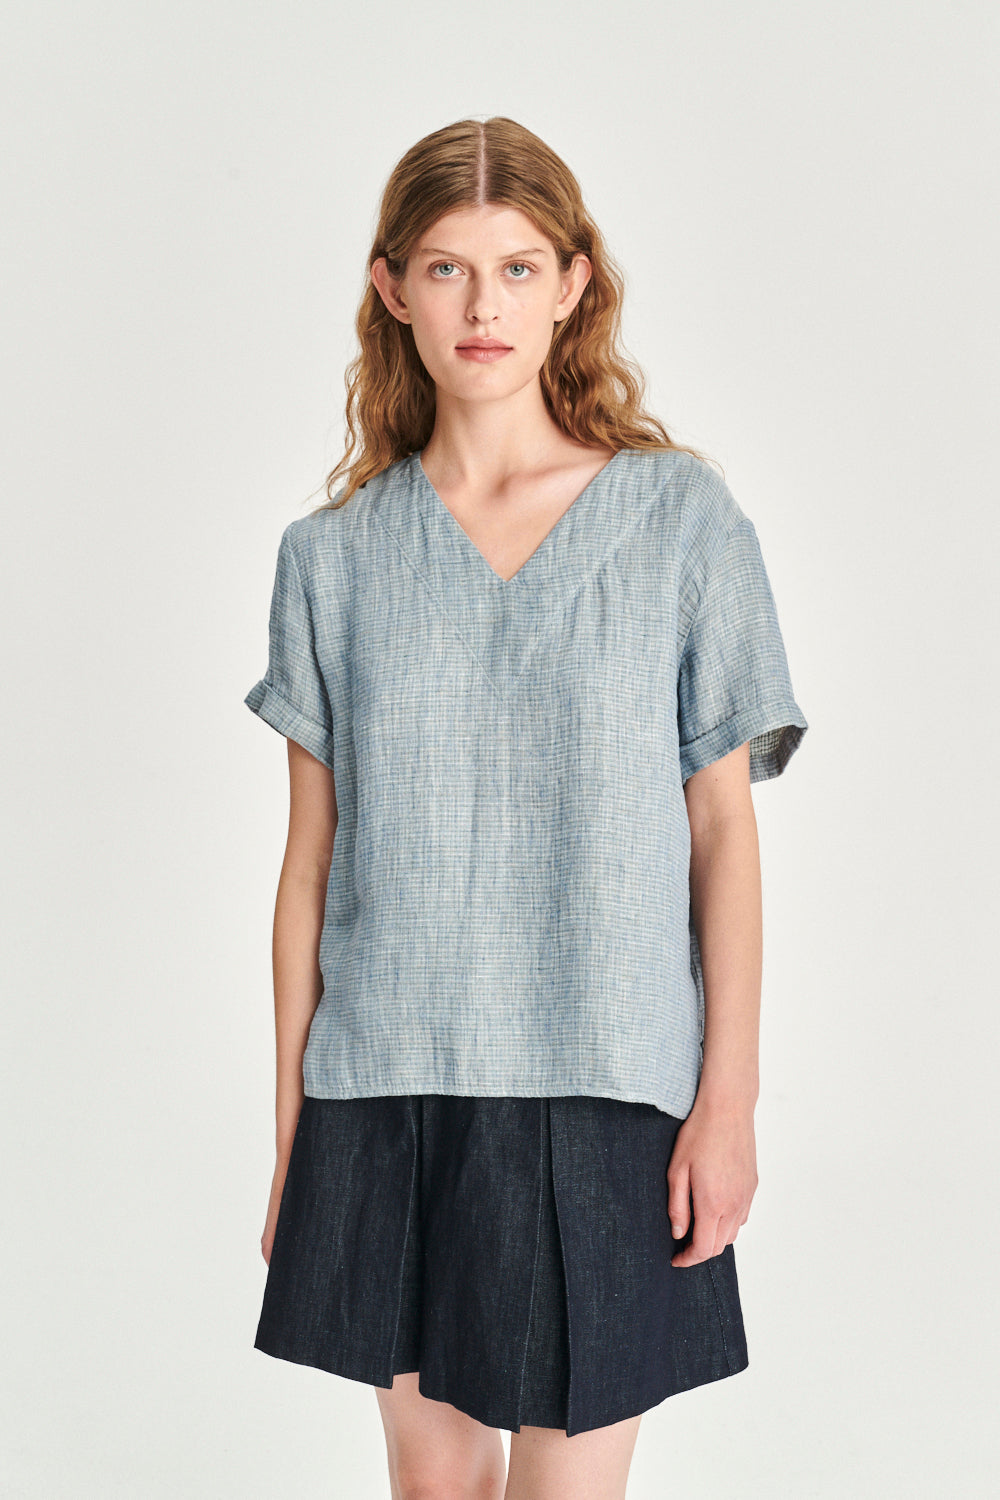 Relaxed Top in a Double Sided Blue and Green Italian Fatigue Linen and Cotton